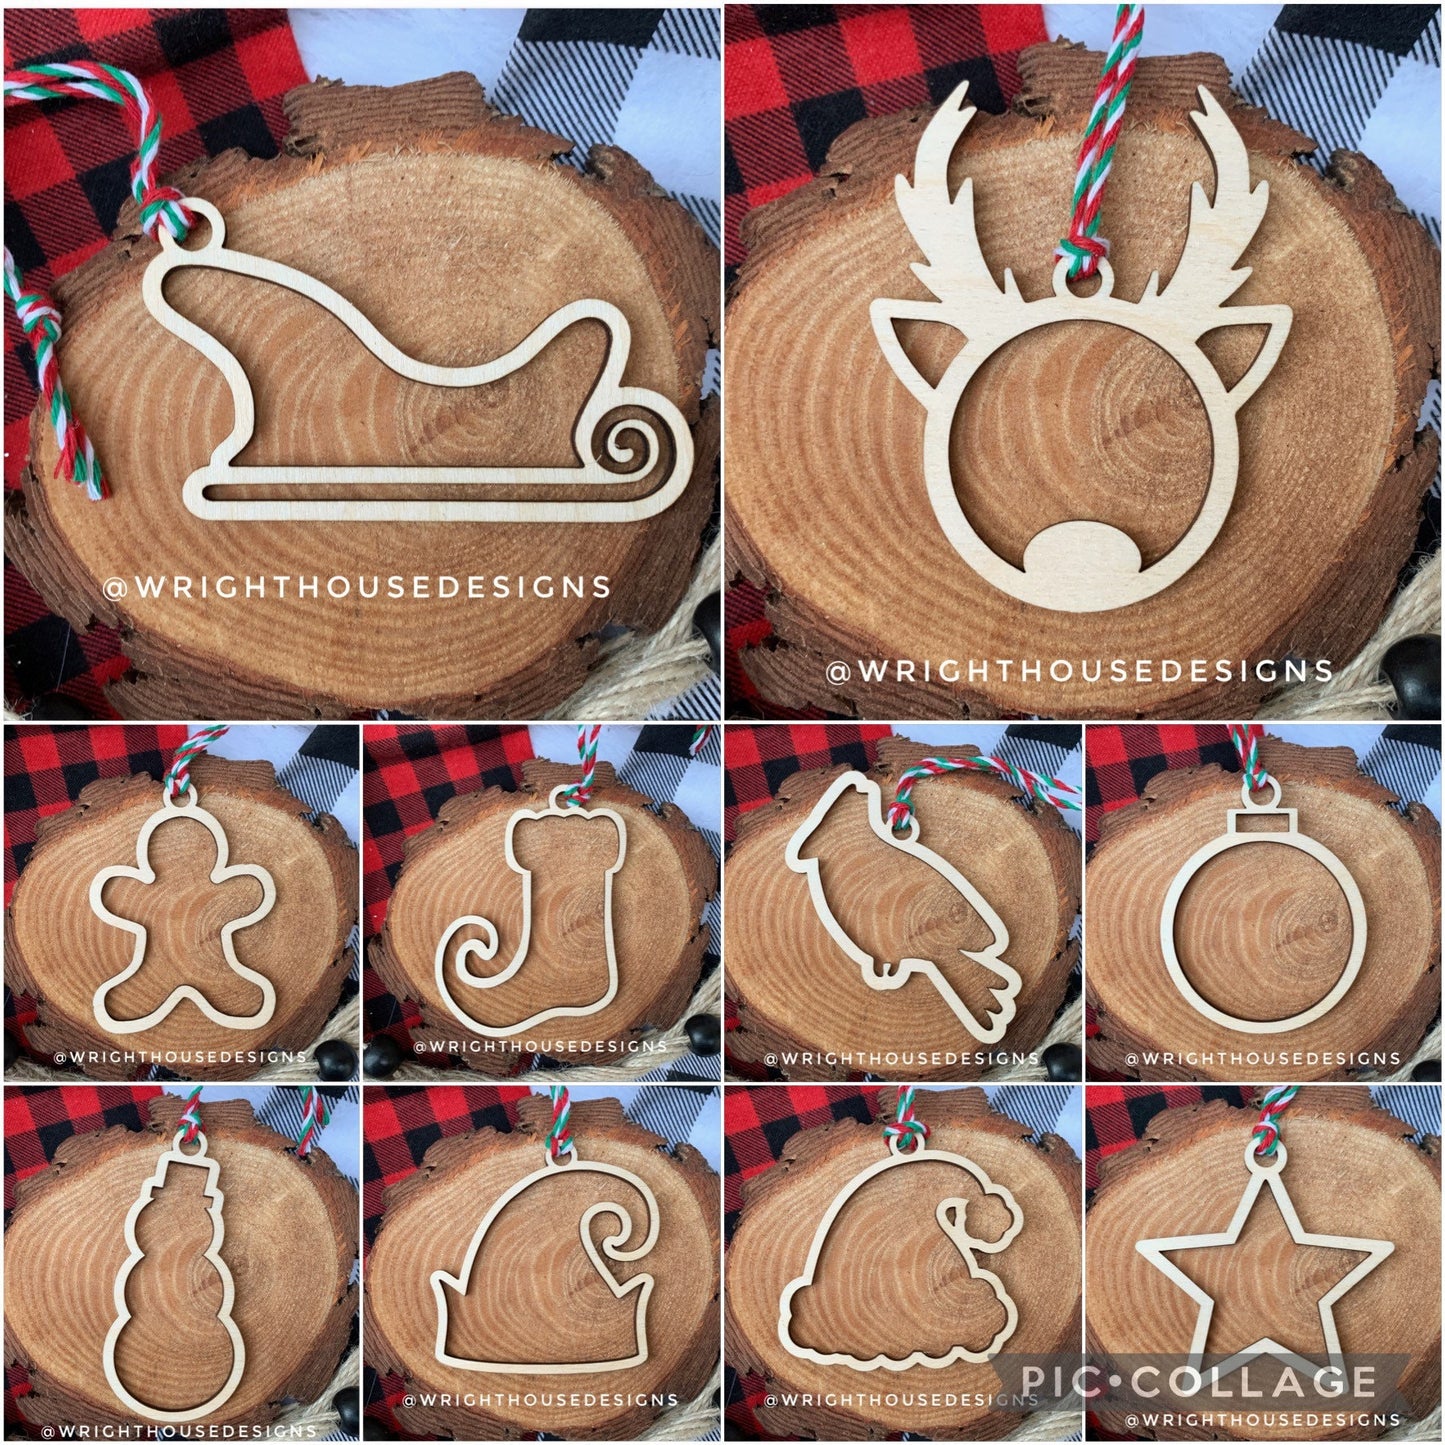 Minimalist Cookie Cutter Style - Wooden Christmas Tree Ornament Set - Laser Cut - Stocking Stuffer - Present Tag - Gift Wrapping Accessory